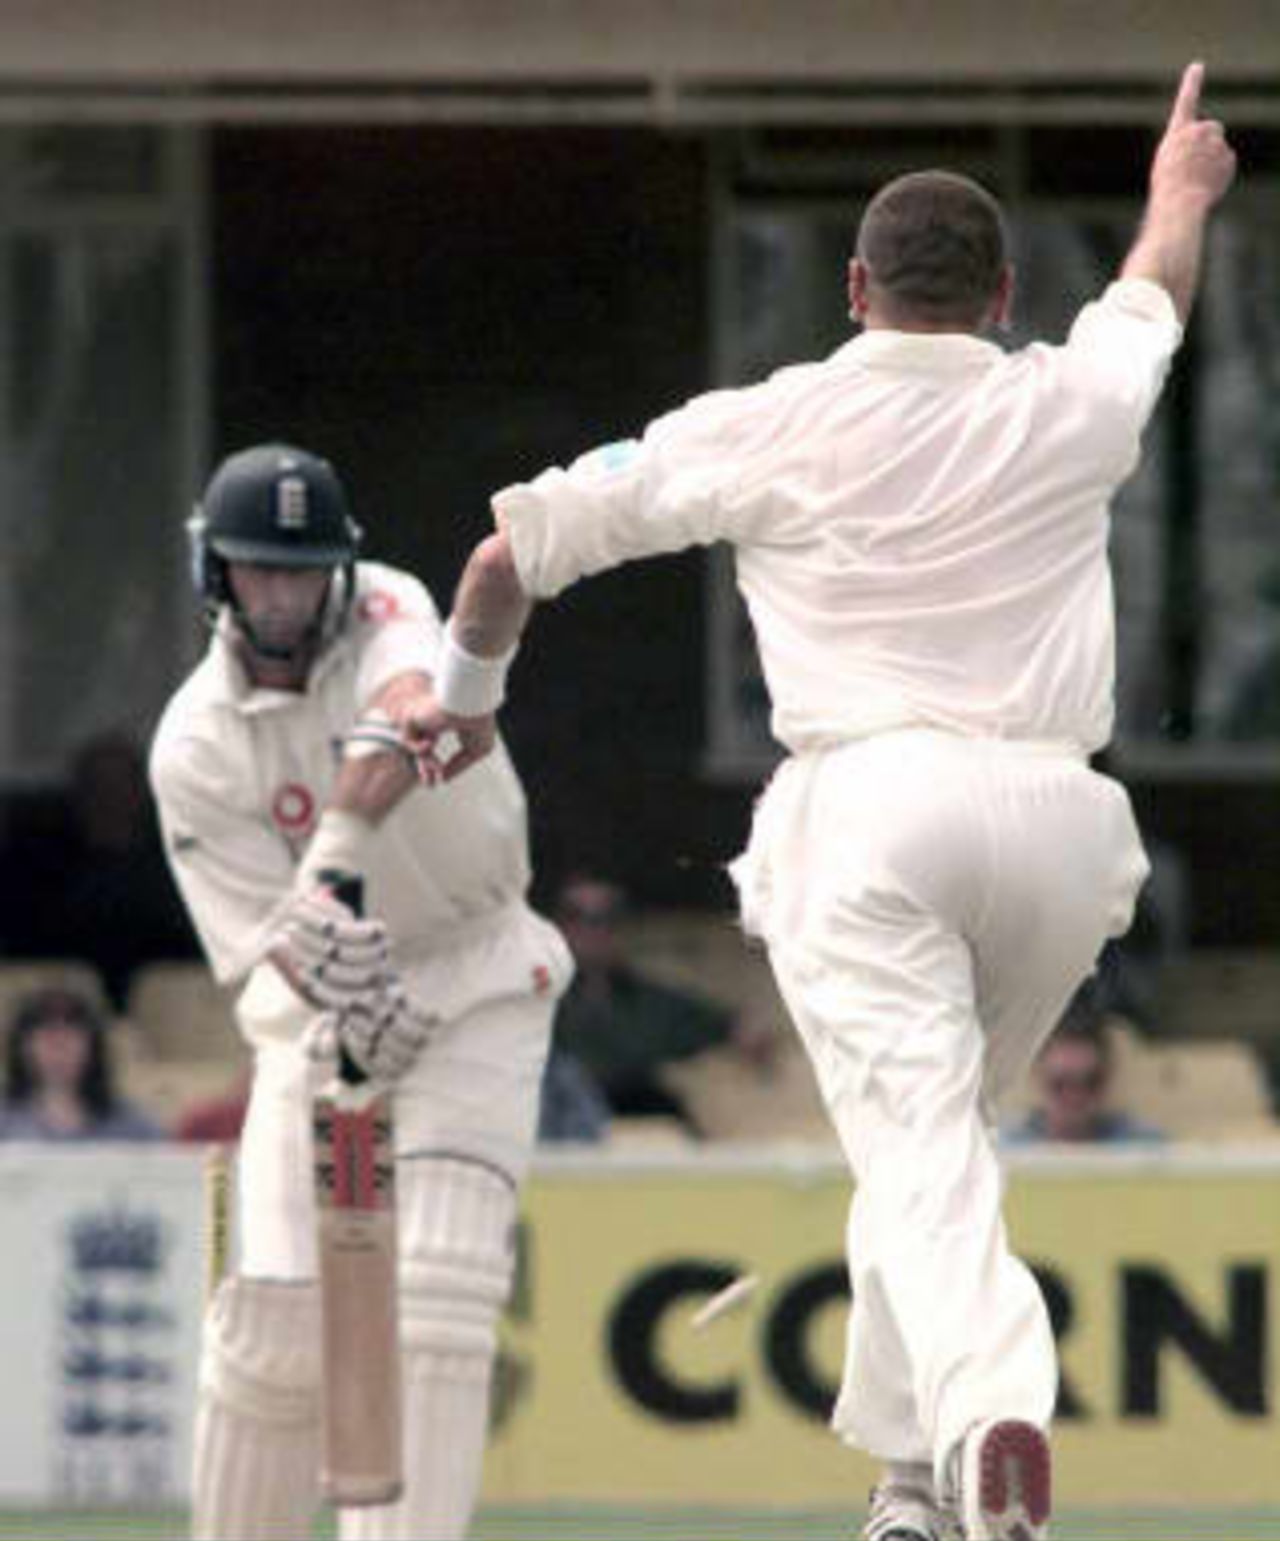 Simon Doull claims the wicket of  Nasser Hussain New Zealand in England, 1999, 1st Test, England v New Zealand,  Edgbaston, Birmingham,  2 July 1999.